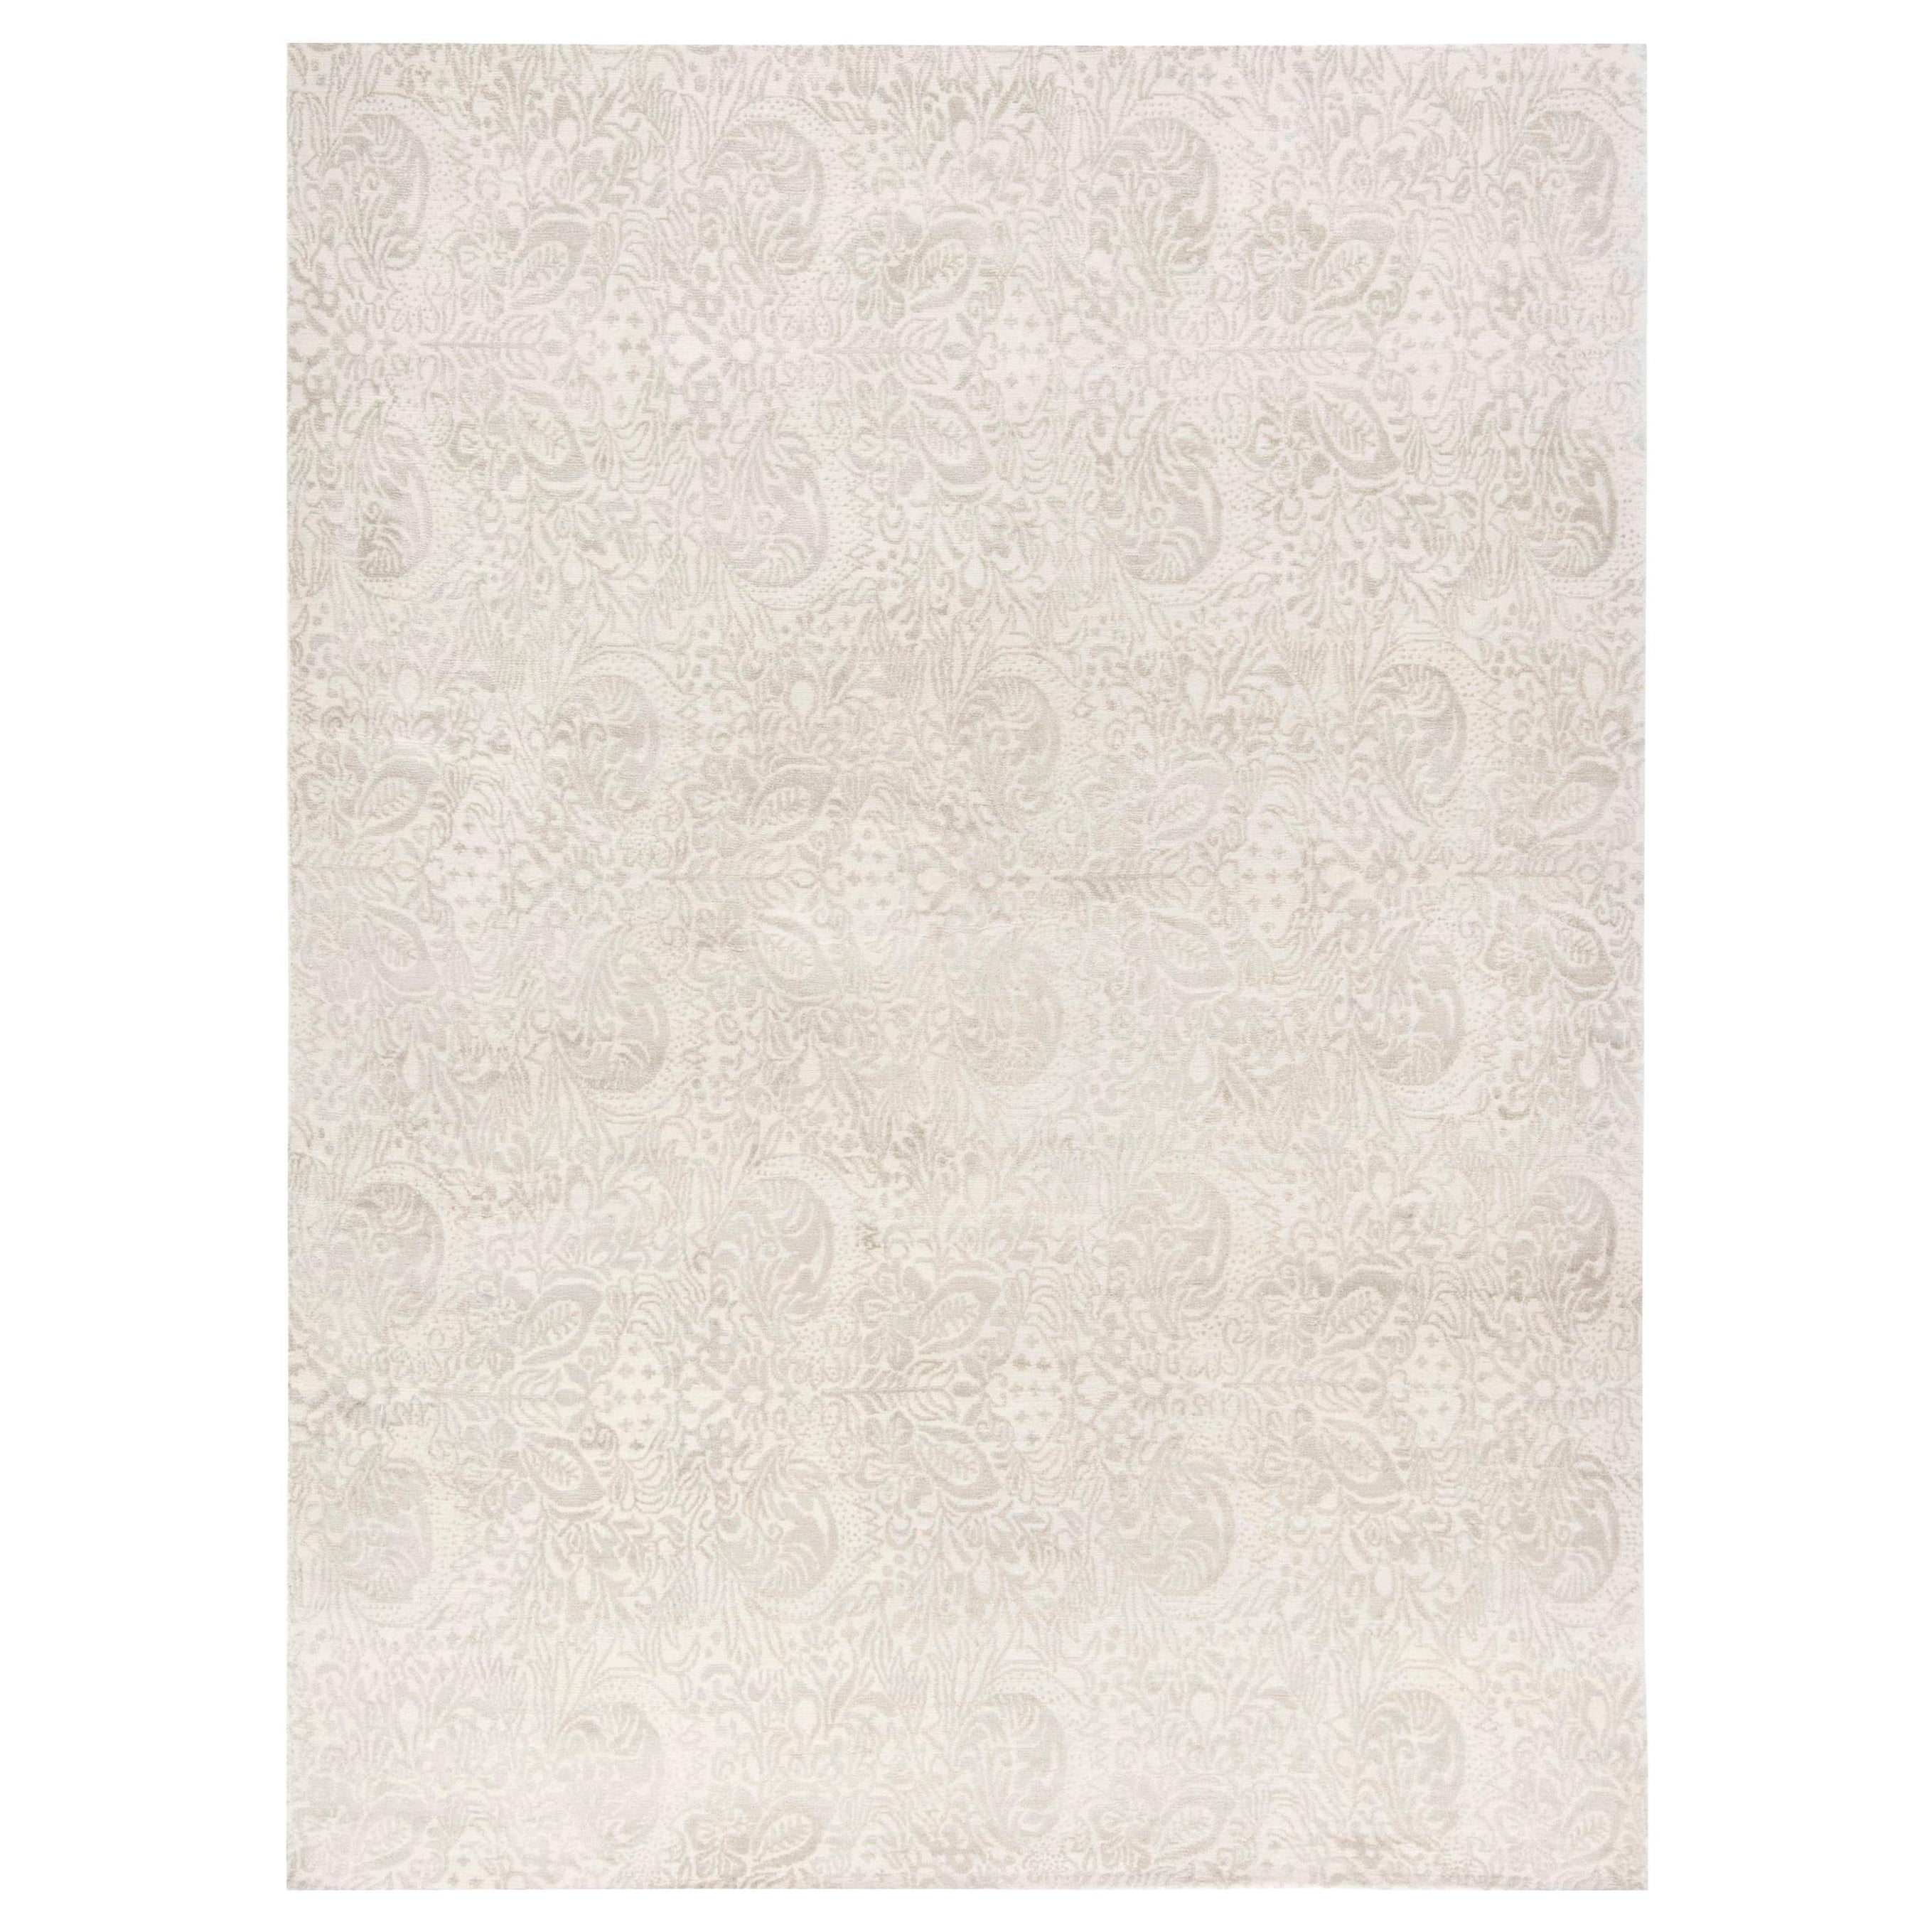 Contemporary Traditional Inspired Floral Rug by Doris Leslie Blau For Sale